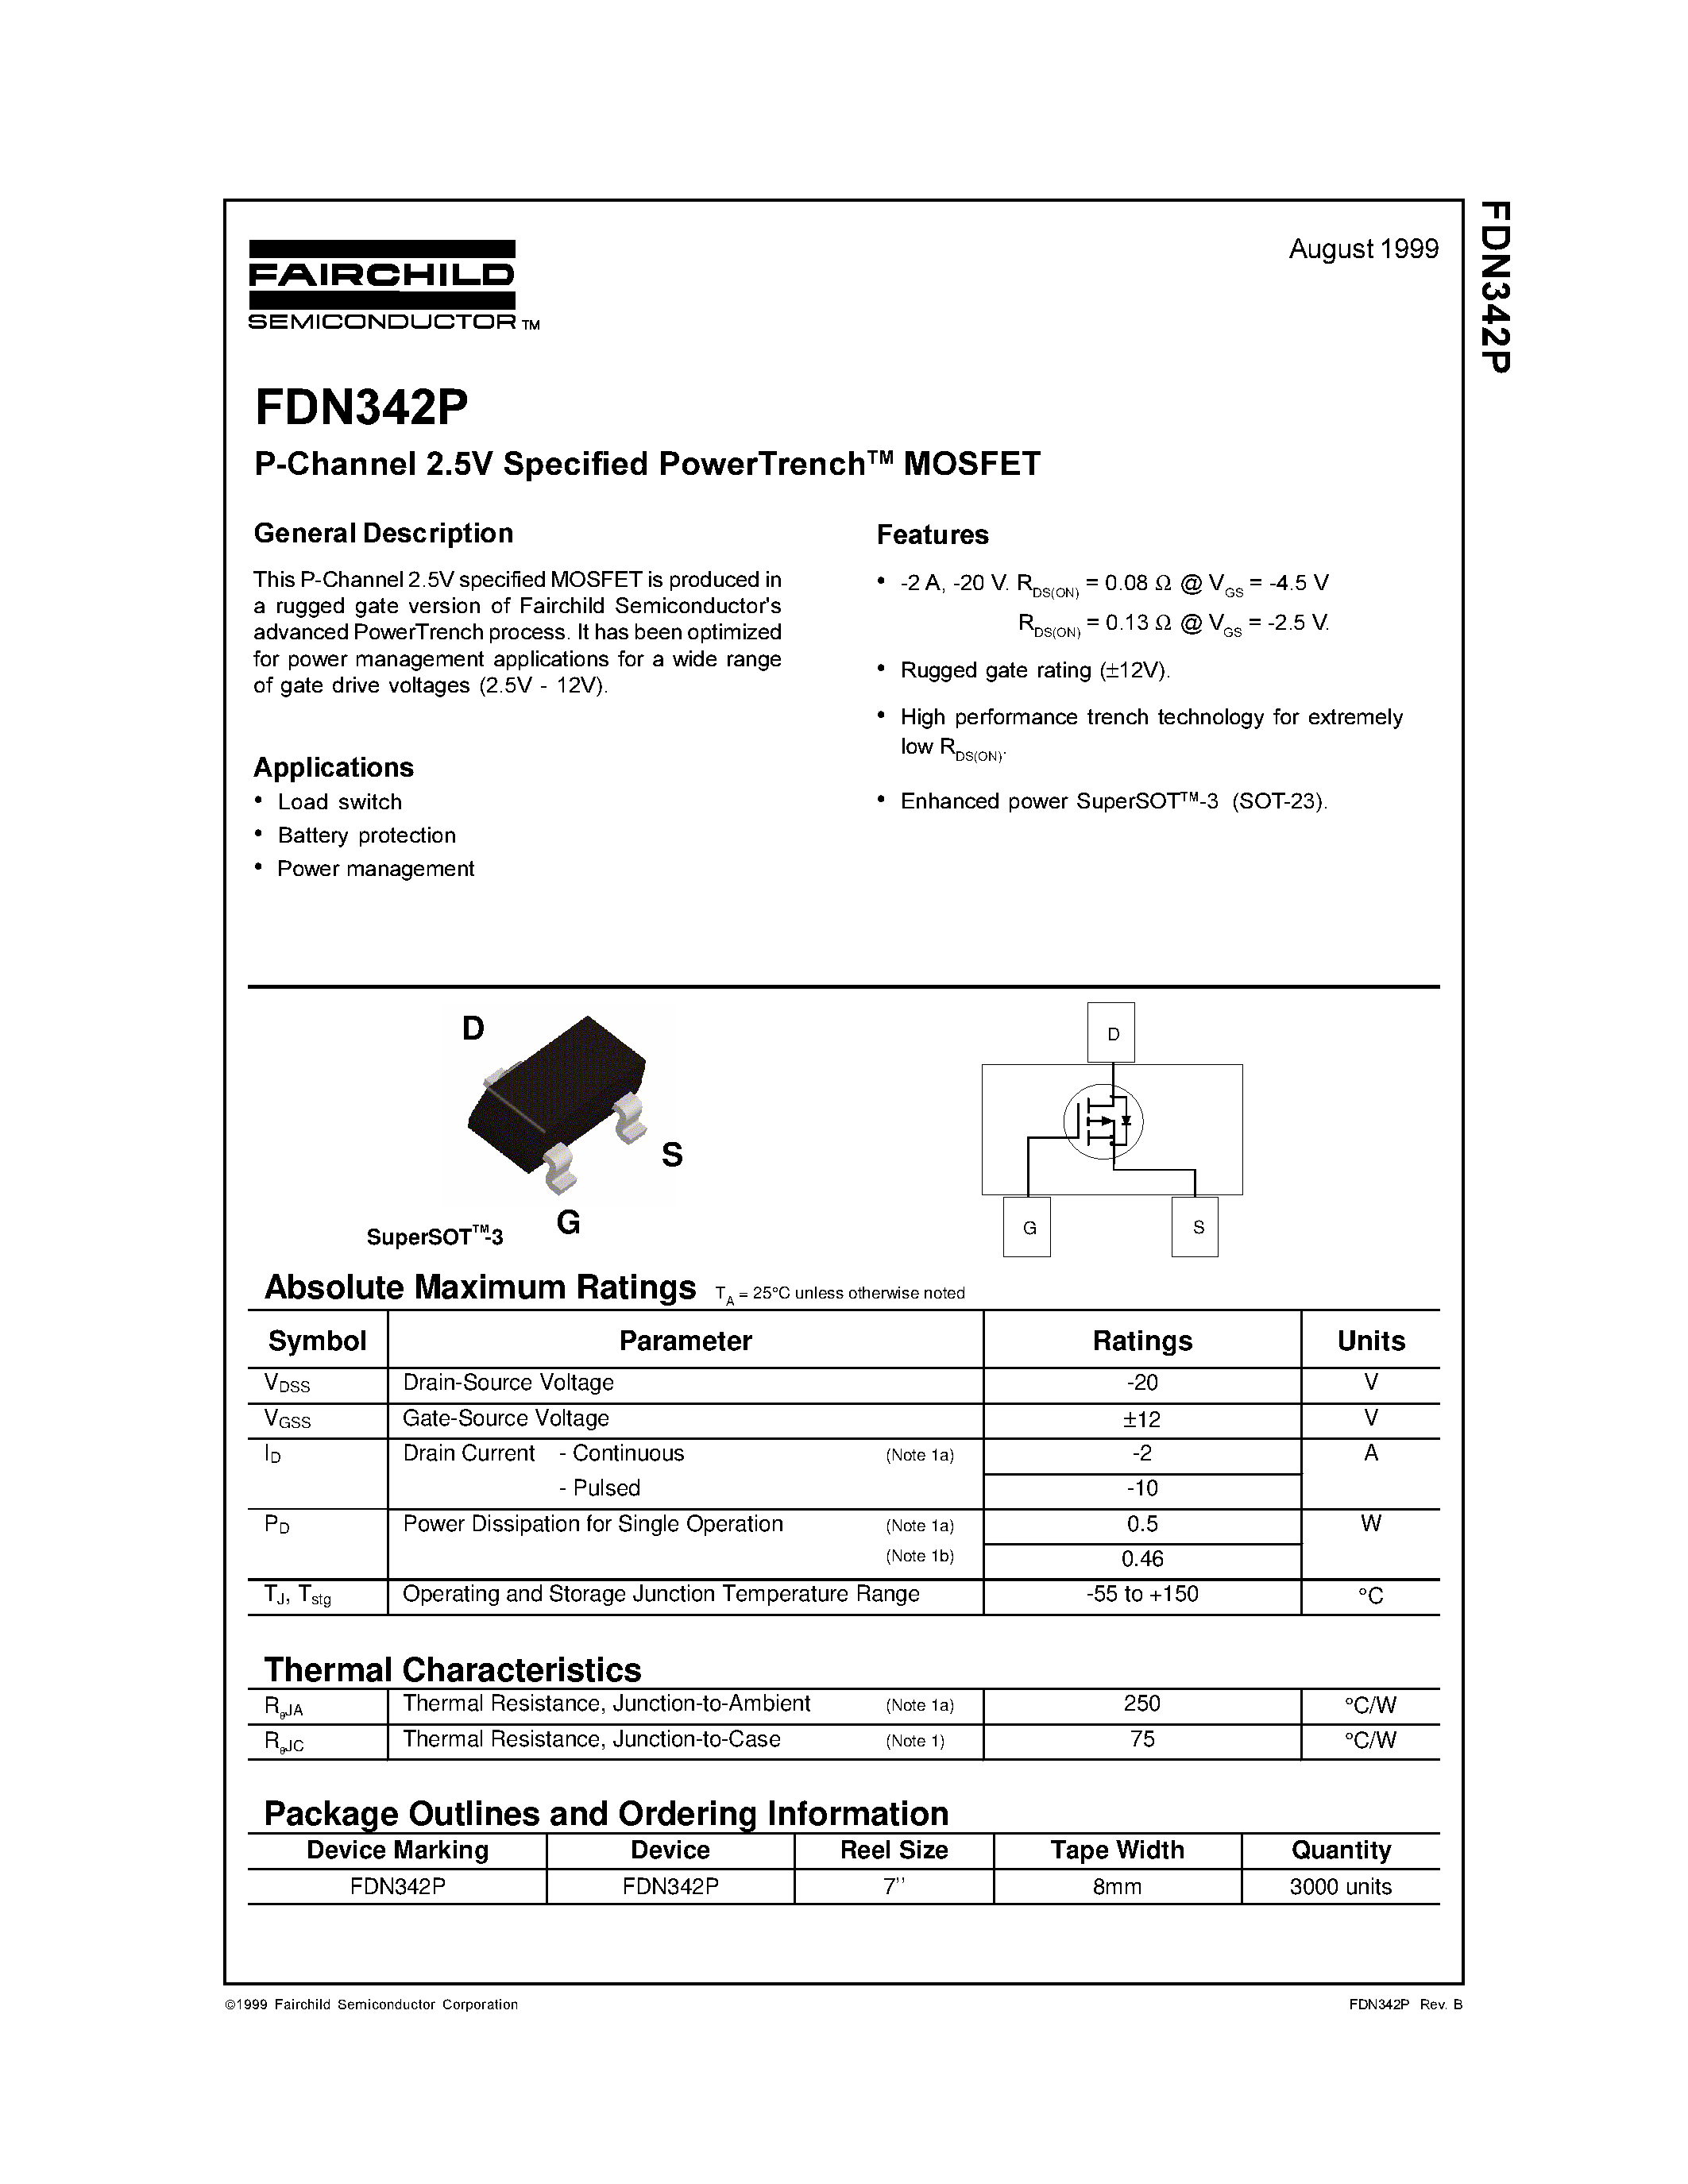 Даташит FDN342P - P-Channel 2.5V Specified PowerTrench MOSFET страница 1